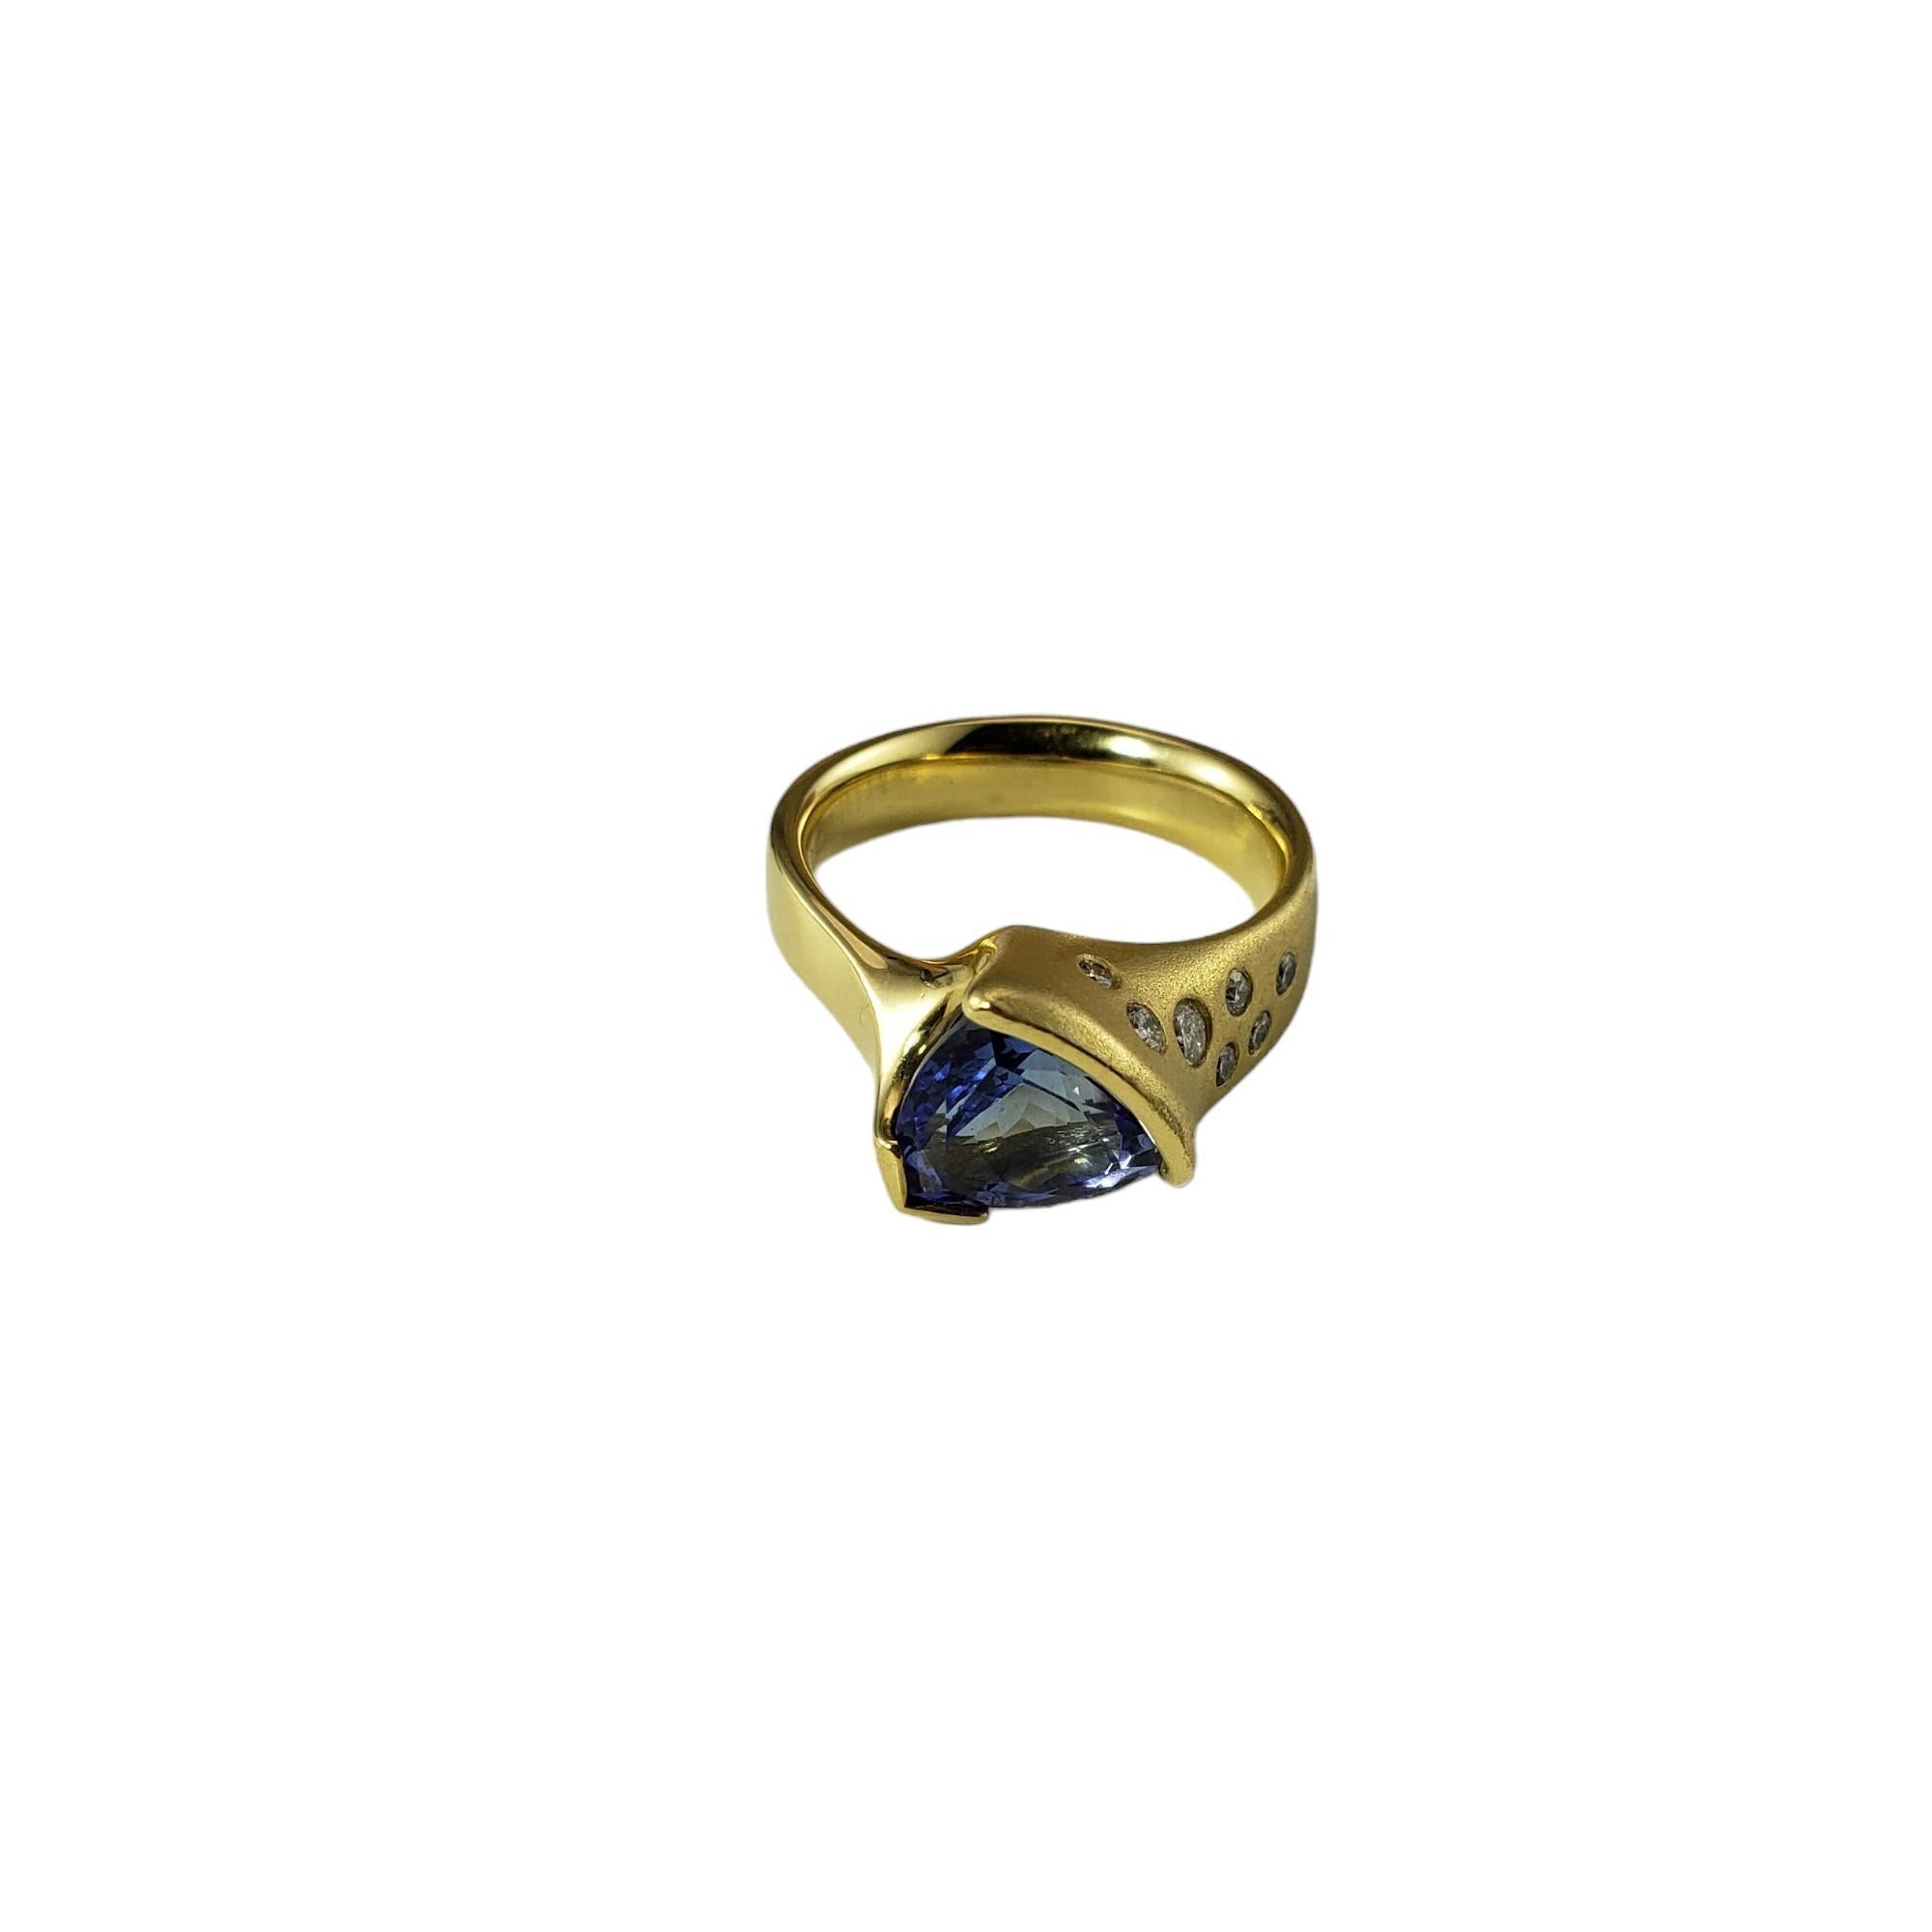 Vintage 18K Yellow Gold Tanzanite and Diamond Ring Size 8

This stunning ring features one triangle cut tanzanite (9.5 mm x 9.4 mm) and seven round brilliant cut diamonds set in classic 18K yellow gold.  Shank: 4 mm.

Tanzanite weight: 3.0